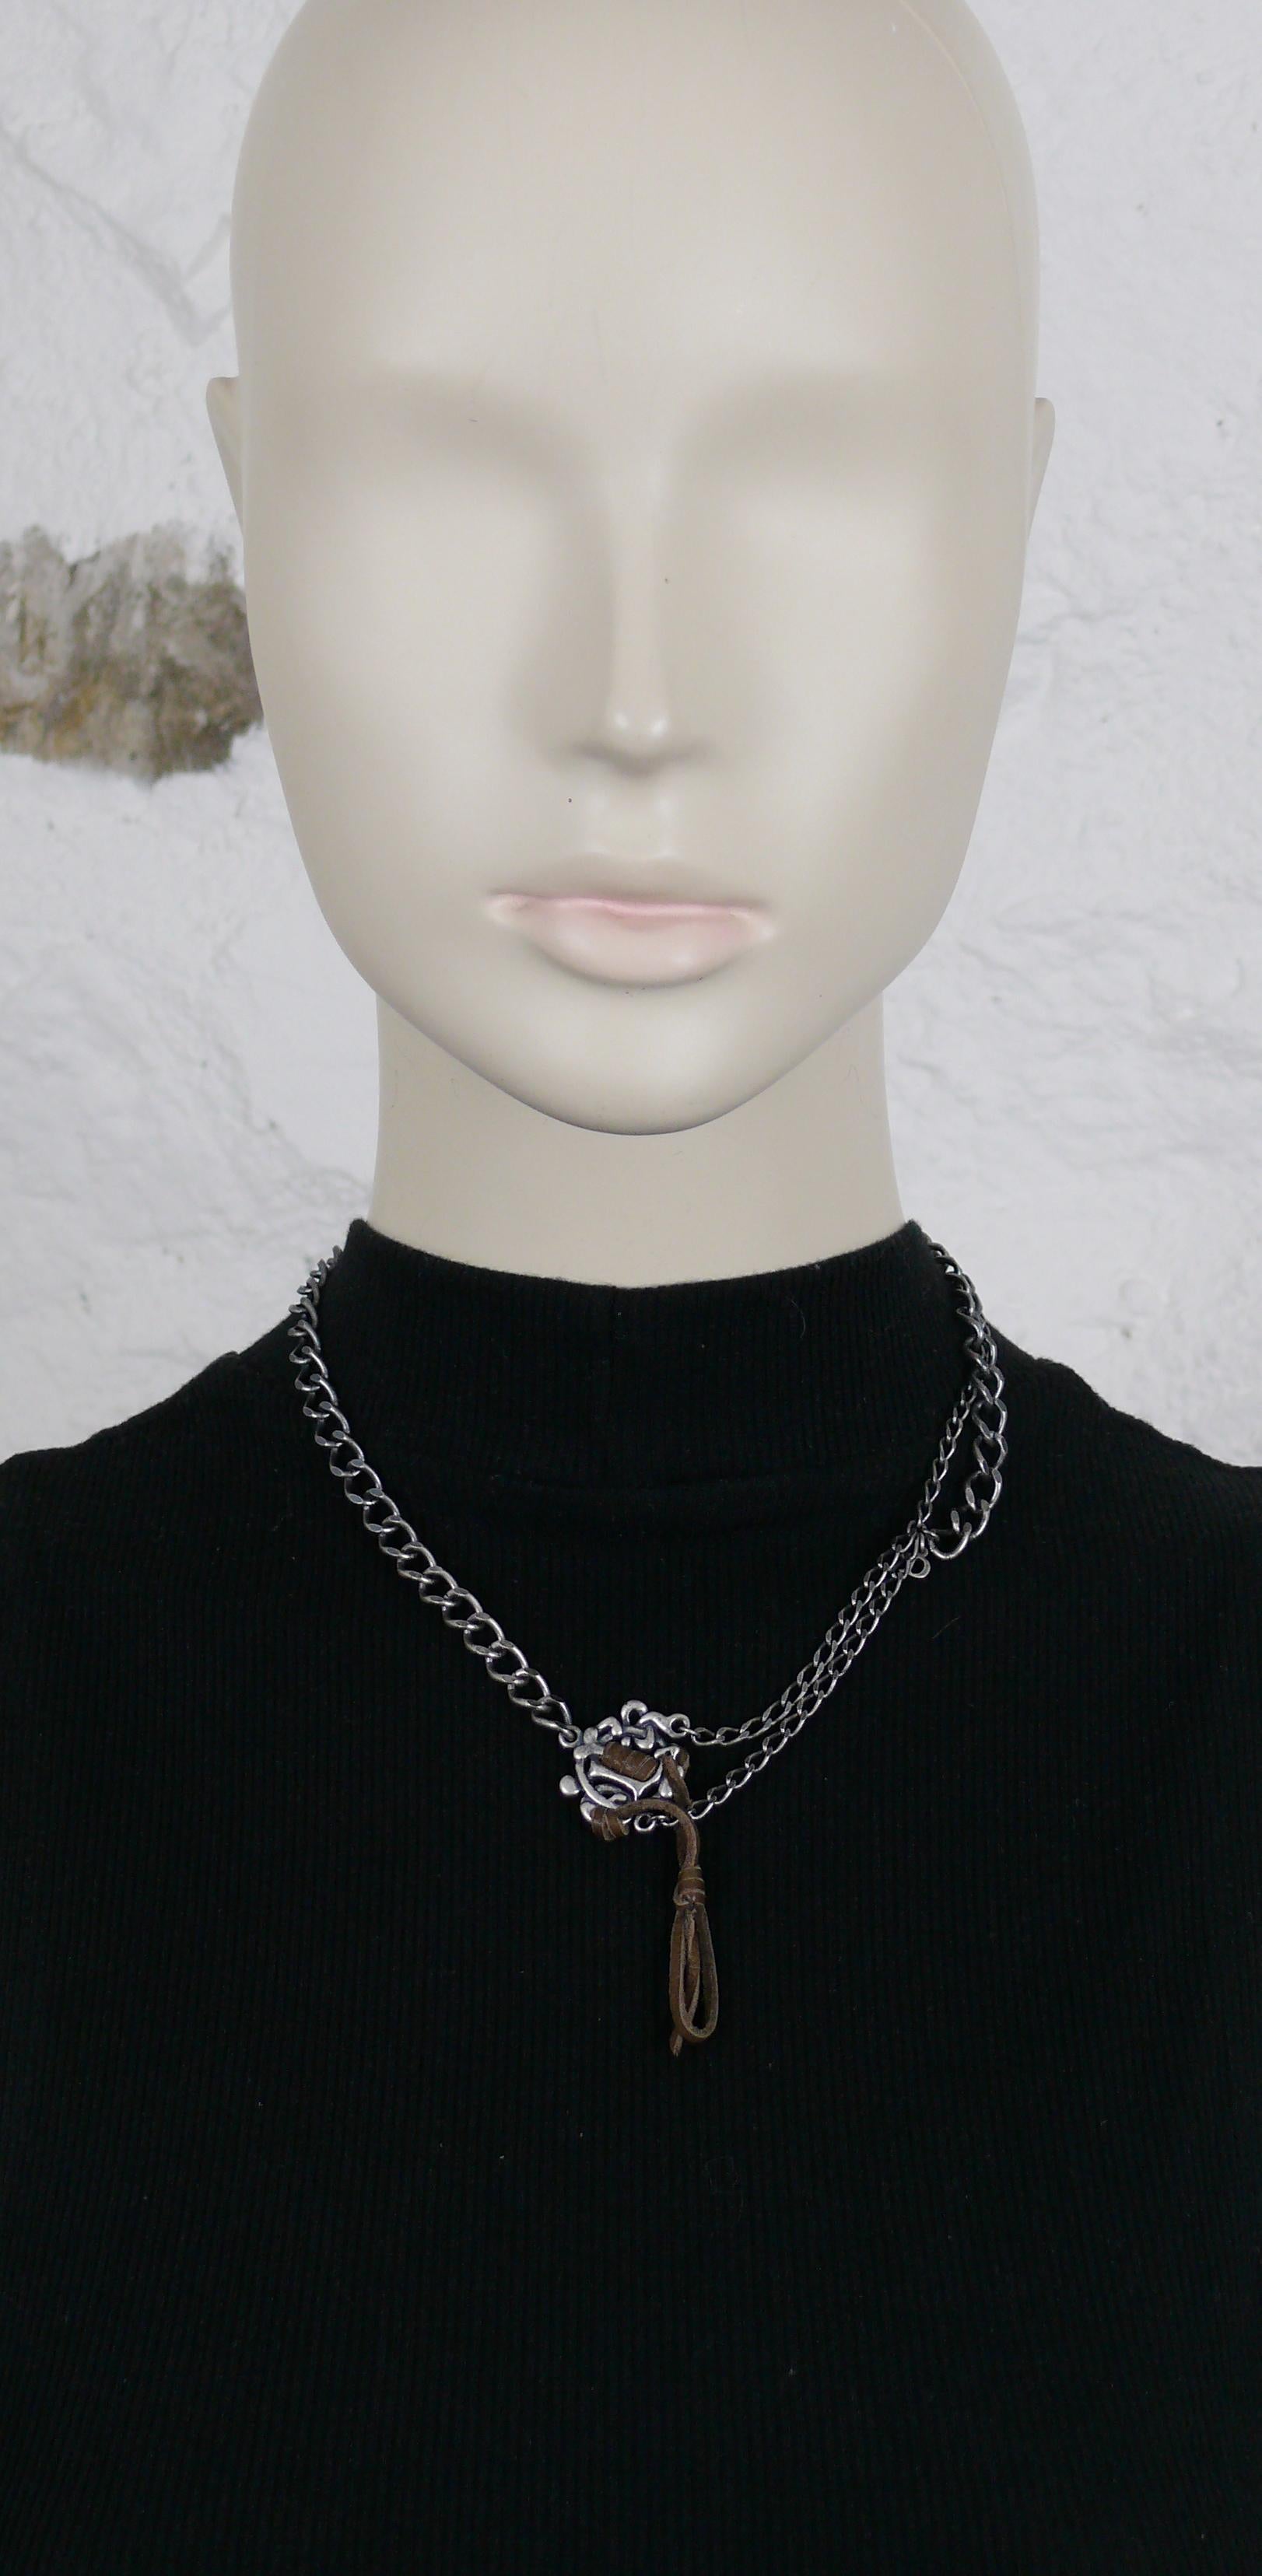 CHRISTIAN DIOR asymetrical antiqued silver toned chain necklace featuring a CHRISTIAN DIOR logo embellished with brown leather.

Silver tone metal hardware.

Adjustable lobster clasp closure.

Embossed DIOR.

Indicative measurements : adjustable